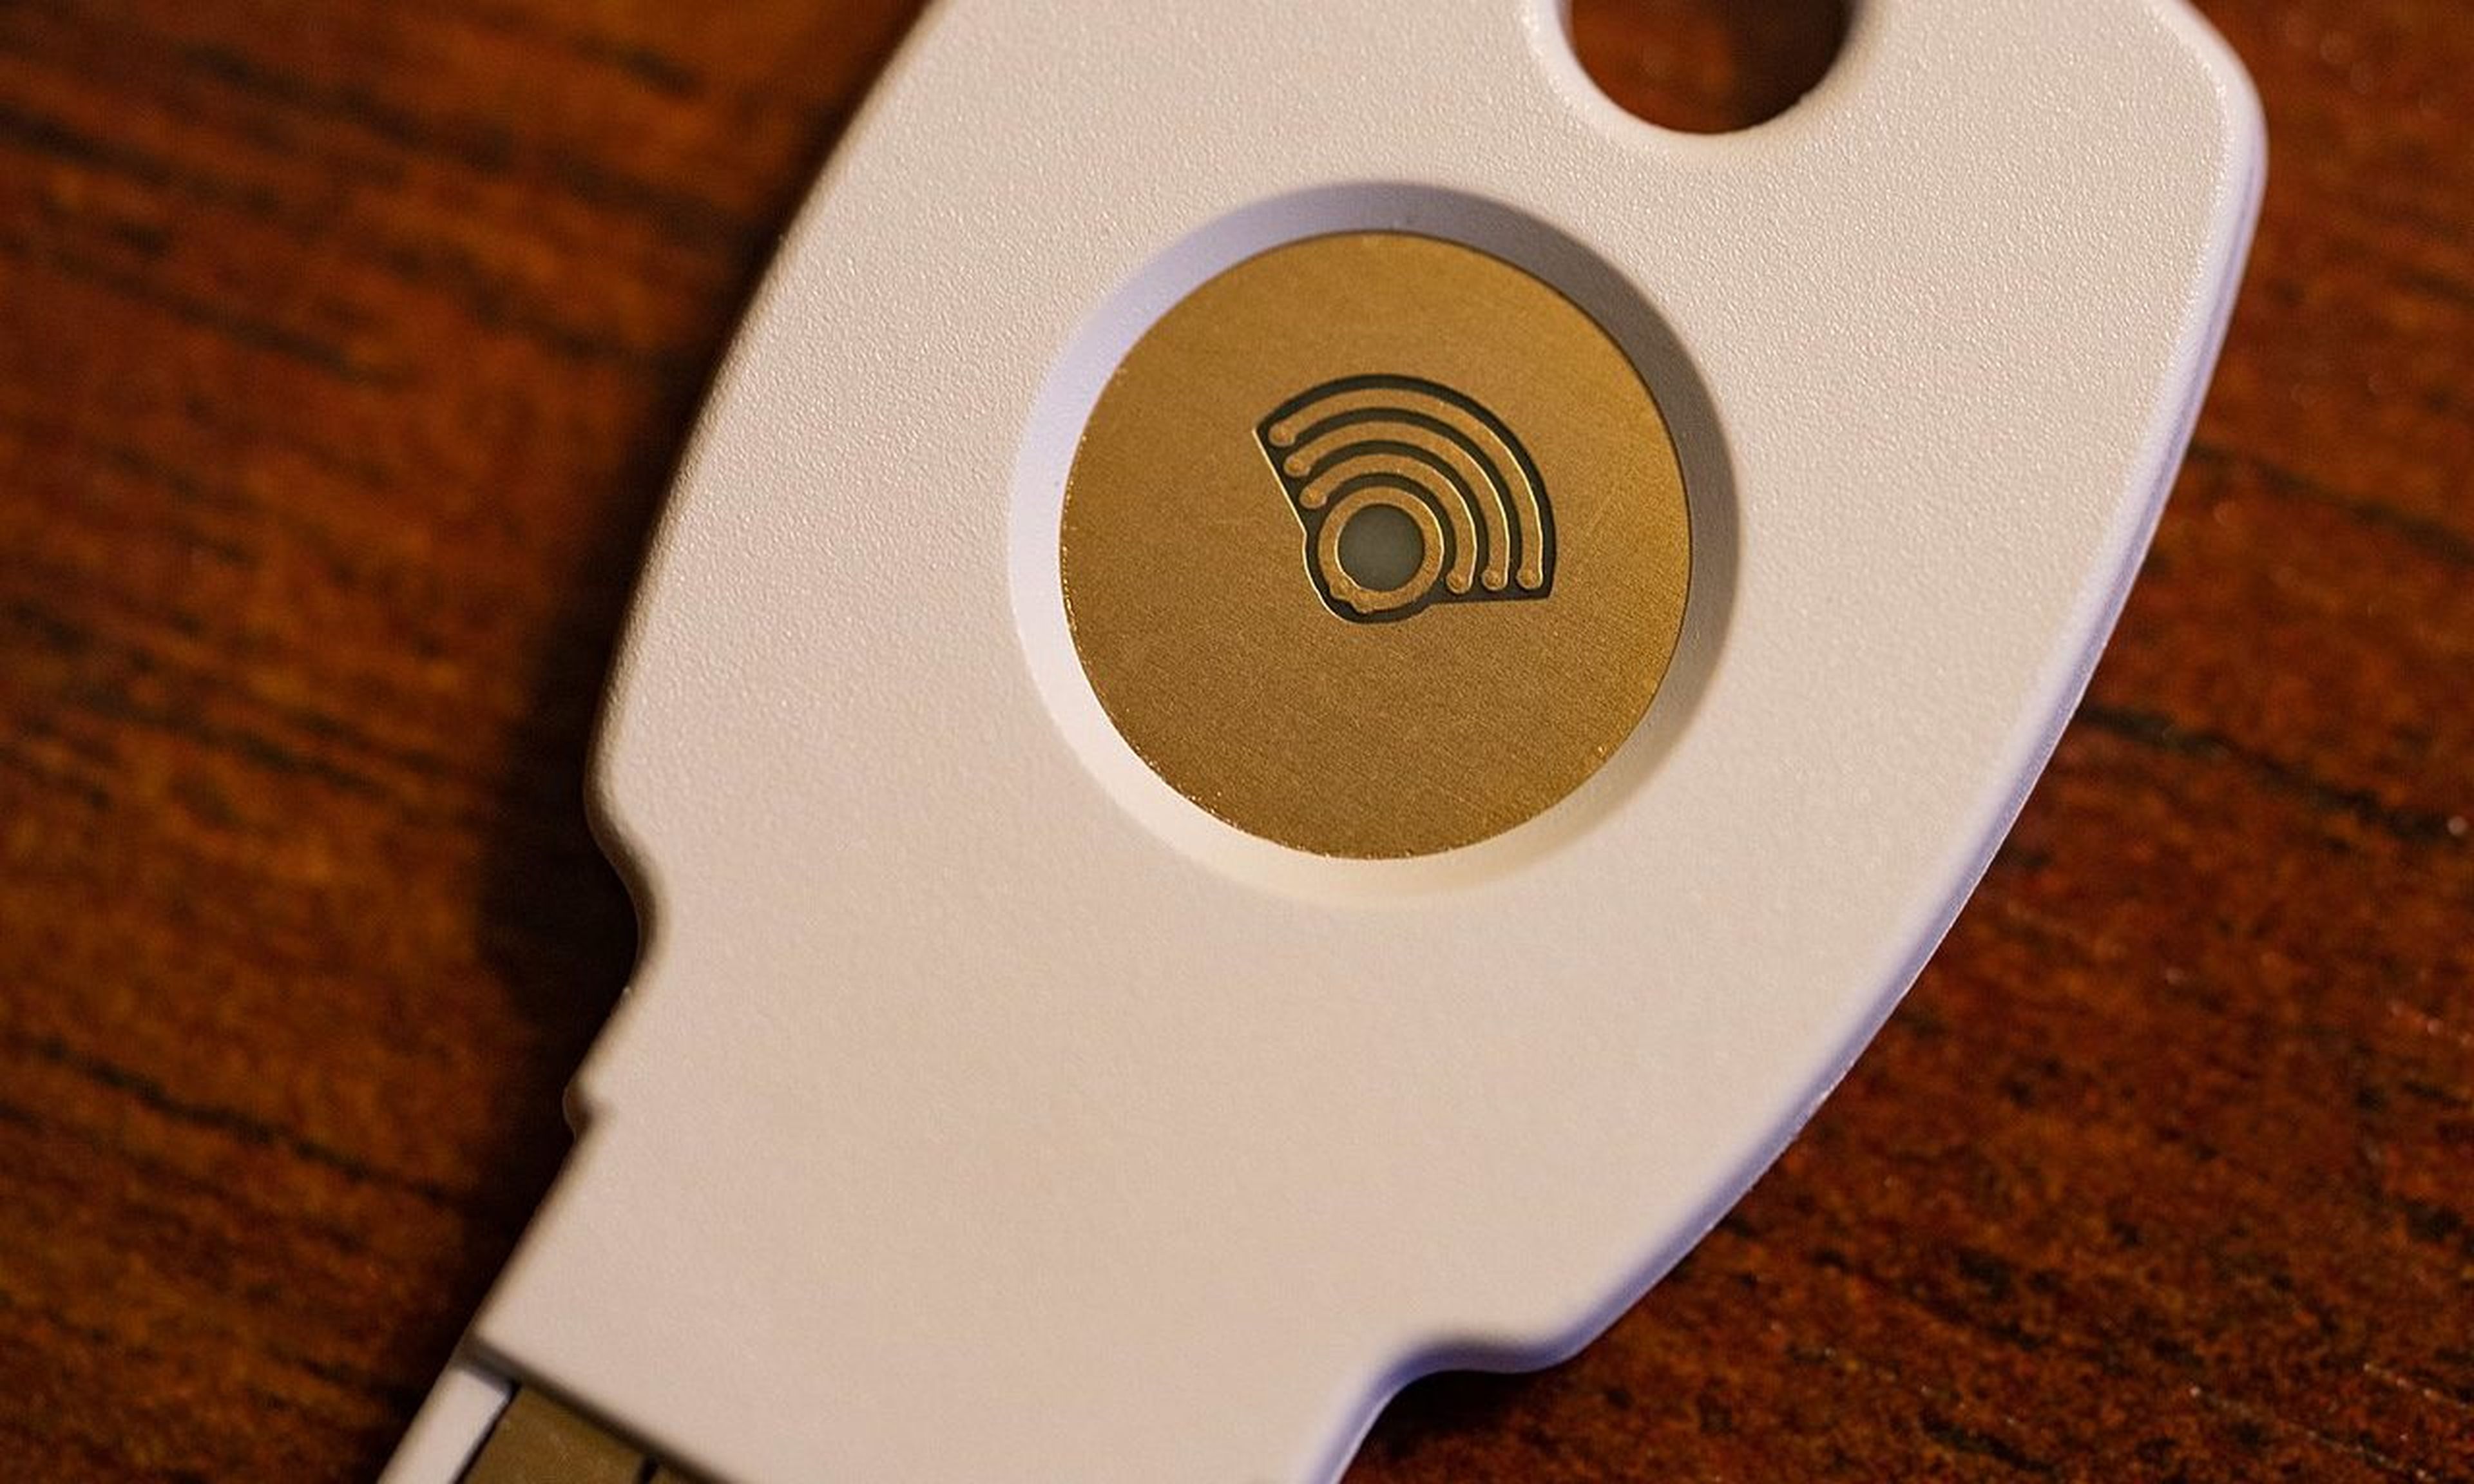 A Google Titan security key, used for 2FA purposes. (Tony Webster from Minneapolis, Minnesota, United States, CC BY 2.0 https://creativecommons.org/licenses/by/2.0, via Wikimedia Commons)